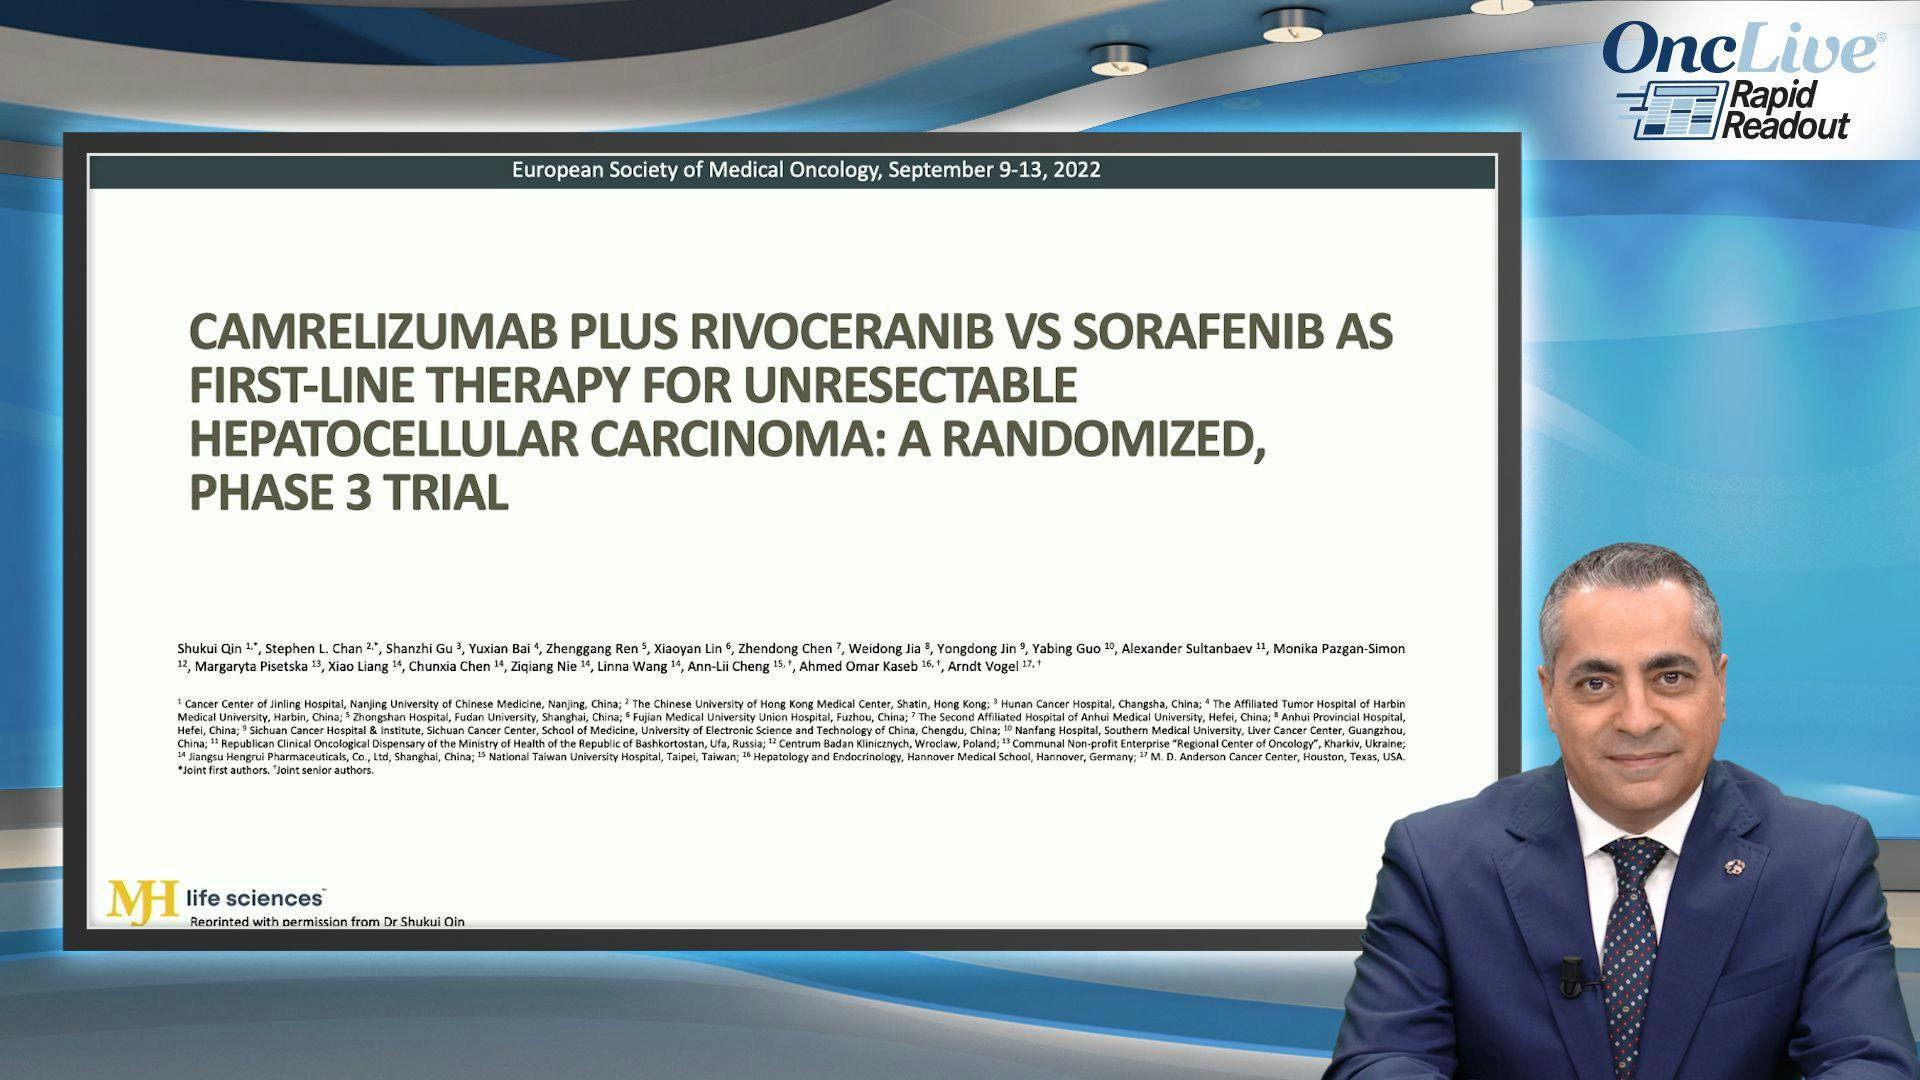 Camrelizumab plus rivoceranib vs sorafenib as first-line therapy for unresectable hepatocellular carcinoma: a randomized, phase 3 trial 